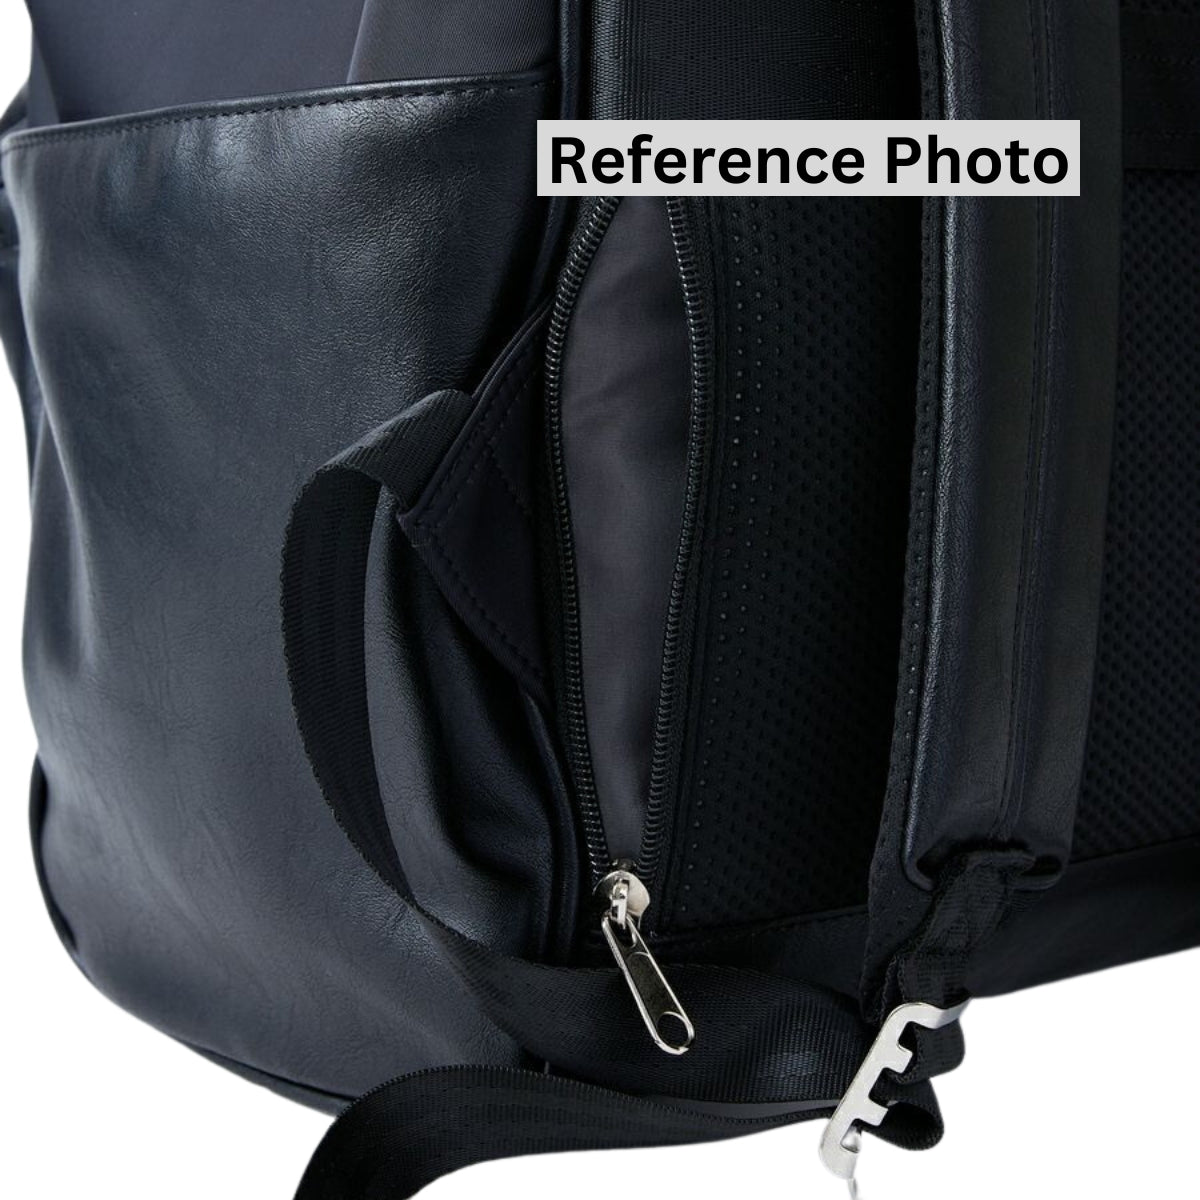 Anello Premium Clasp Backpack Large in Grey